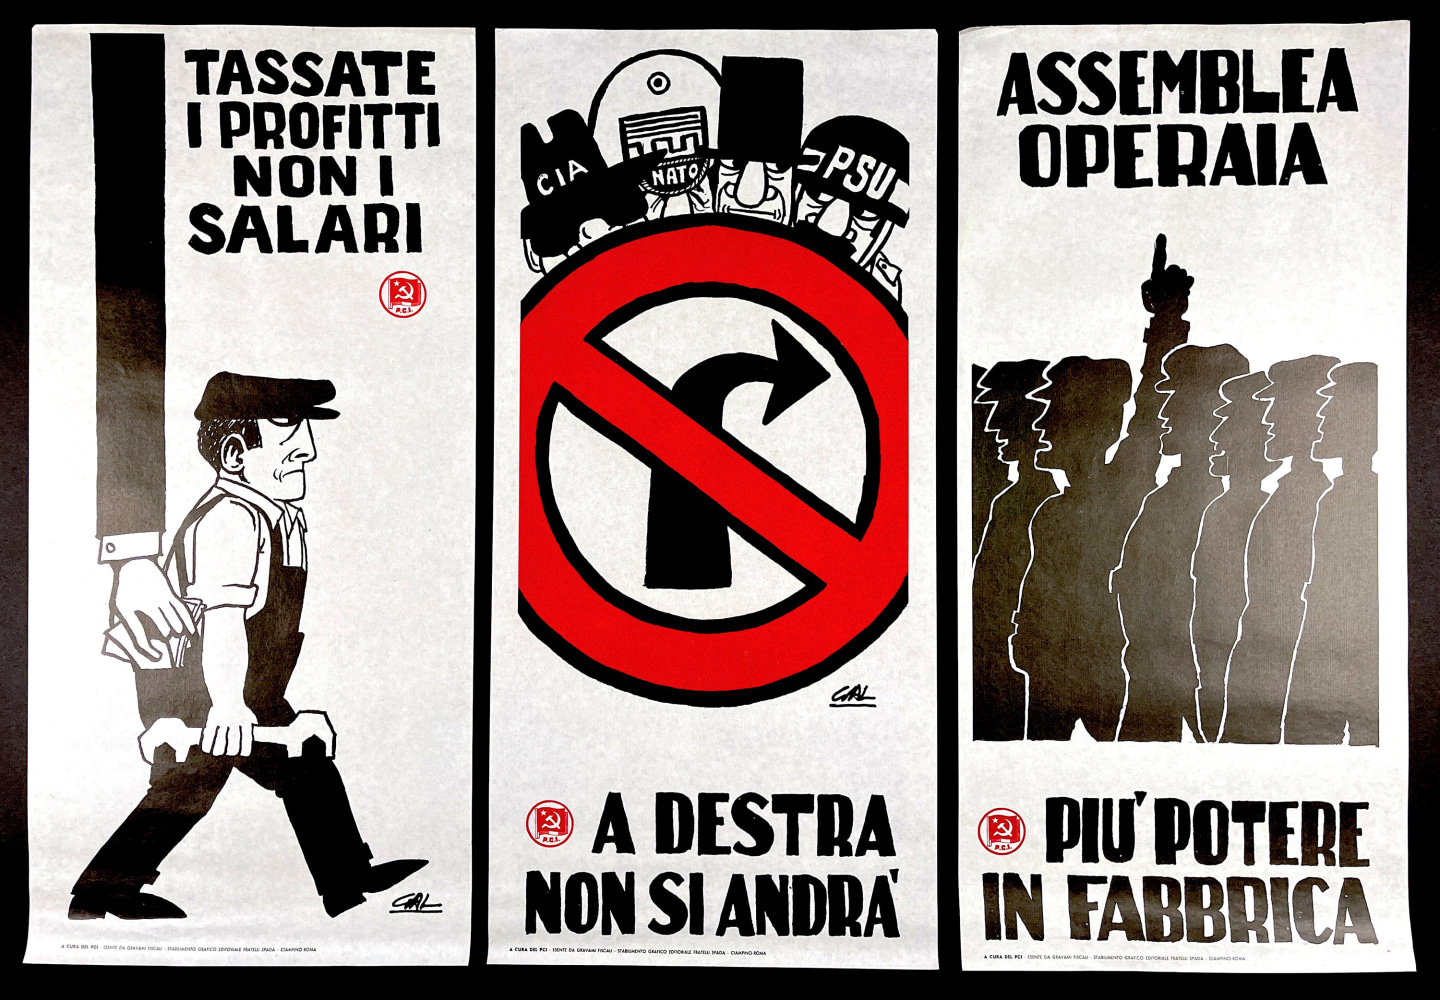 Collection of six posters, ca. 1968, for the Italian Communist Party
GAL (Gino Galli),&amp;nbsp;[1968]

Illustrated posters, lithographically printed in red and black on semi gloss translucent commercial stock
Approx. 27.5&amp;quot; x 13&amp;quot;
Edition size: Unknown
$1800

Condition and provenance notes: Very good overall, to near fine. Original posters from the student protests of 1968. This lot acquired from a private collection in California.

Published by Fratelli Spada for Partito Comunista Italiano

INQUIRE